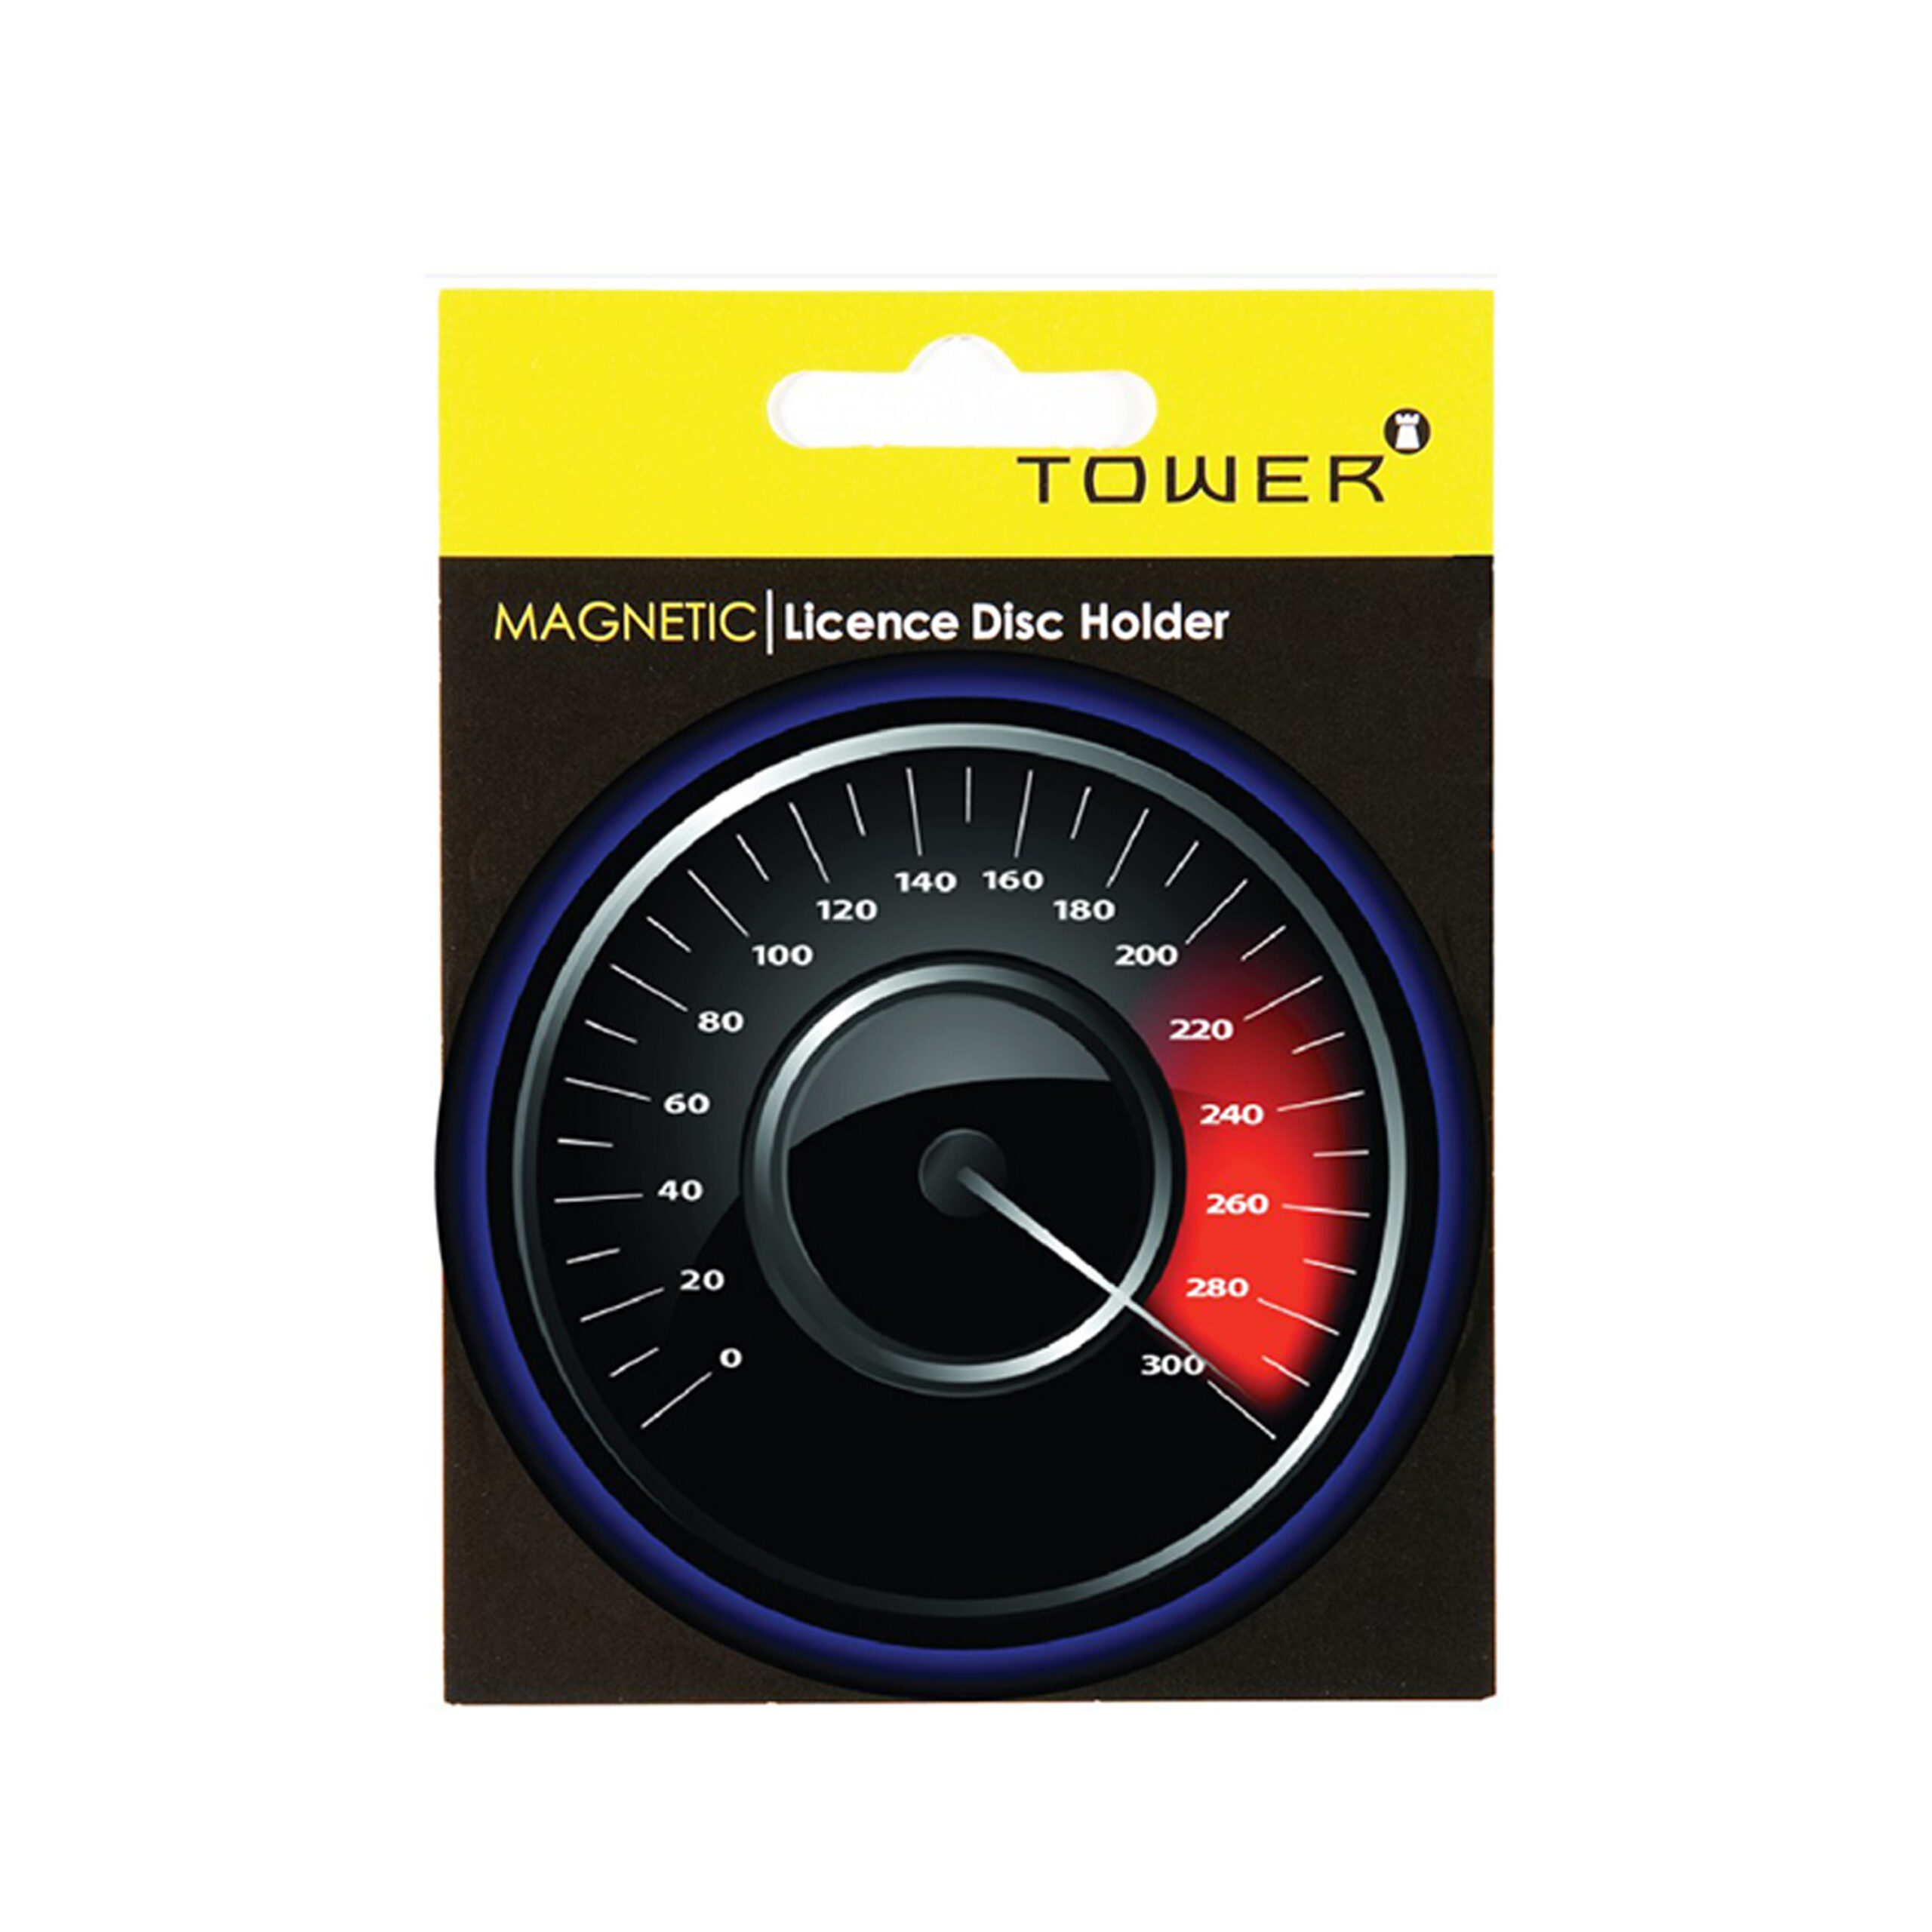 TOWER  MAGNETIC
LICENCE DISC
HOLDER 
"SPEEDOMETER"